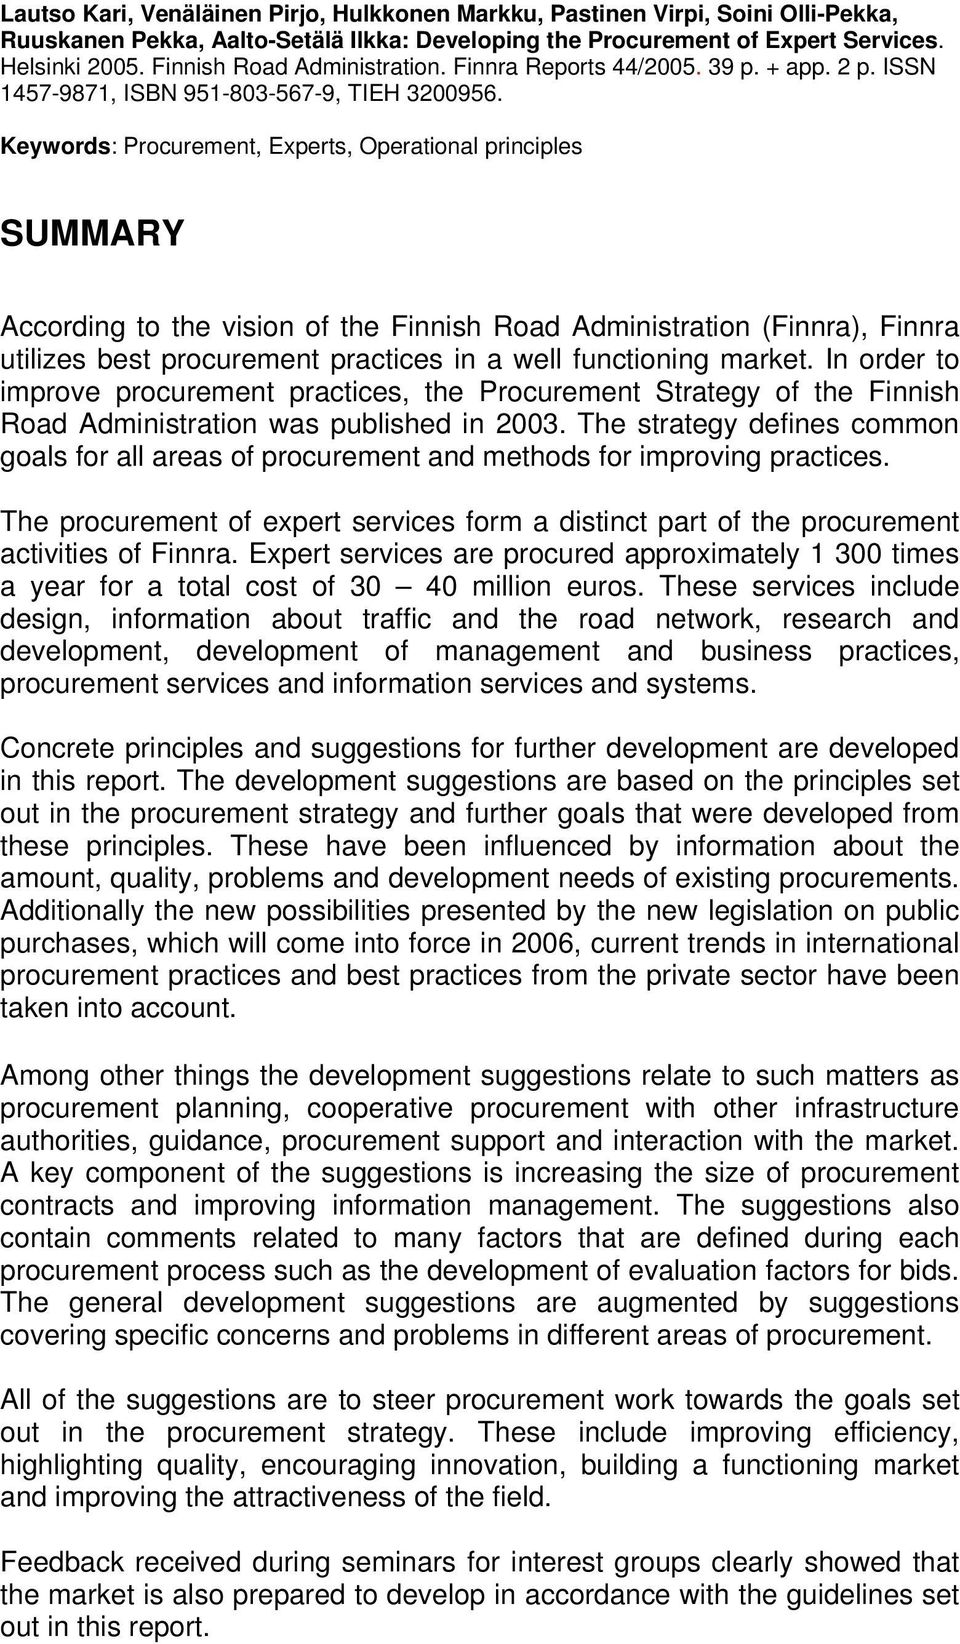 Keywords: Procurement, Experts, Operational principles SUMMARY According to the vision of the Finnish Road Administration (Finnra), Finnra utilizes best procurement practices in a well functioning